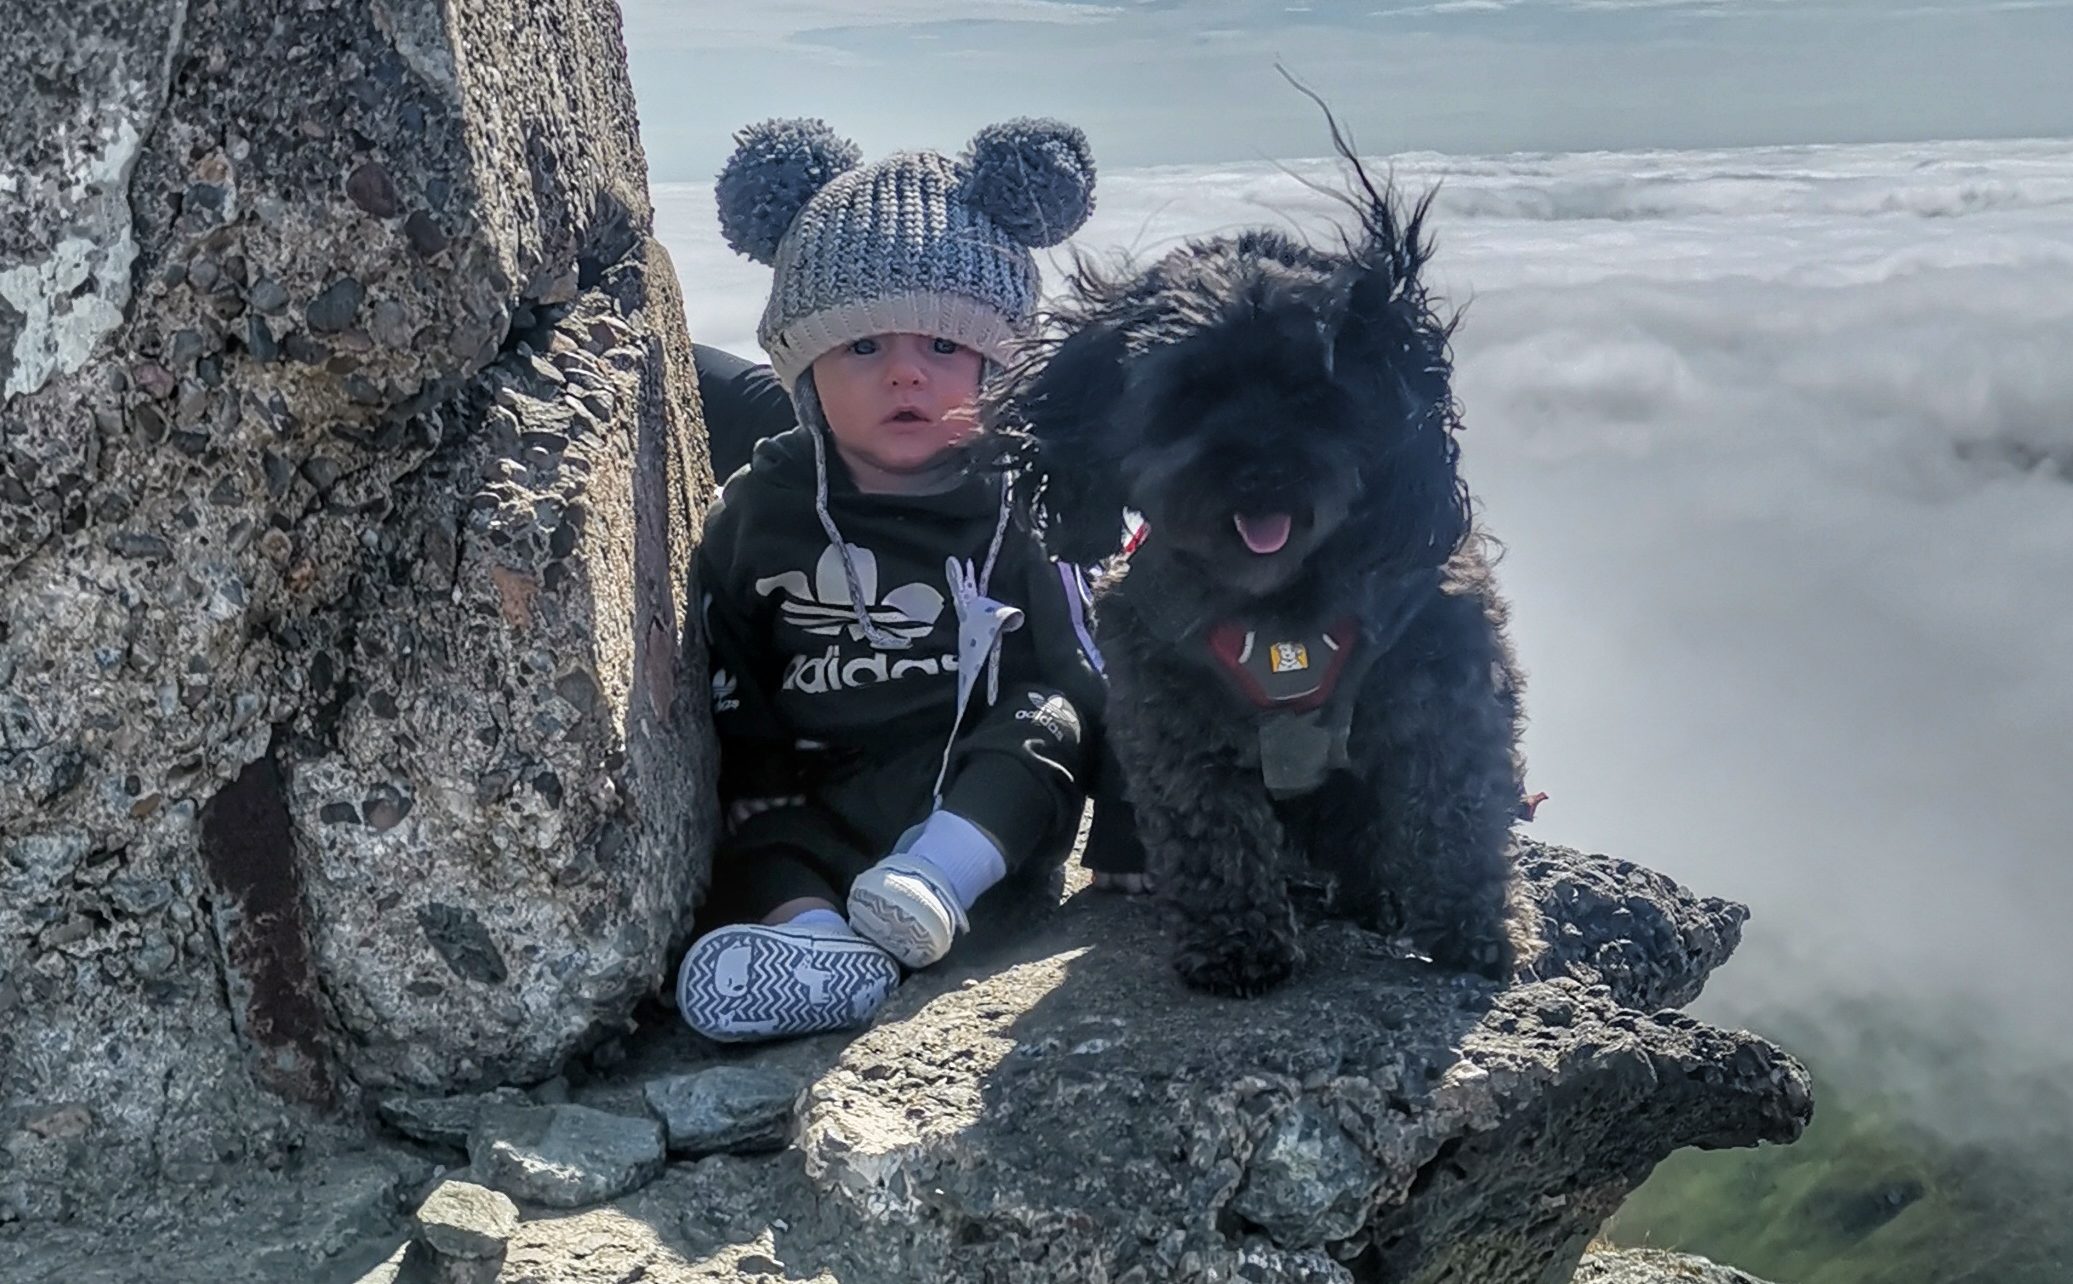 Innis at the summit of  Ben Lawers with pet dog Millie.